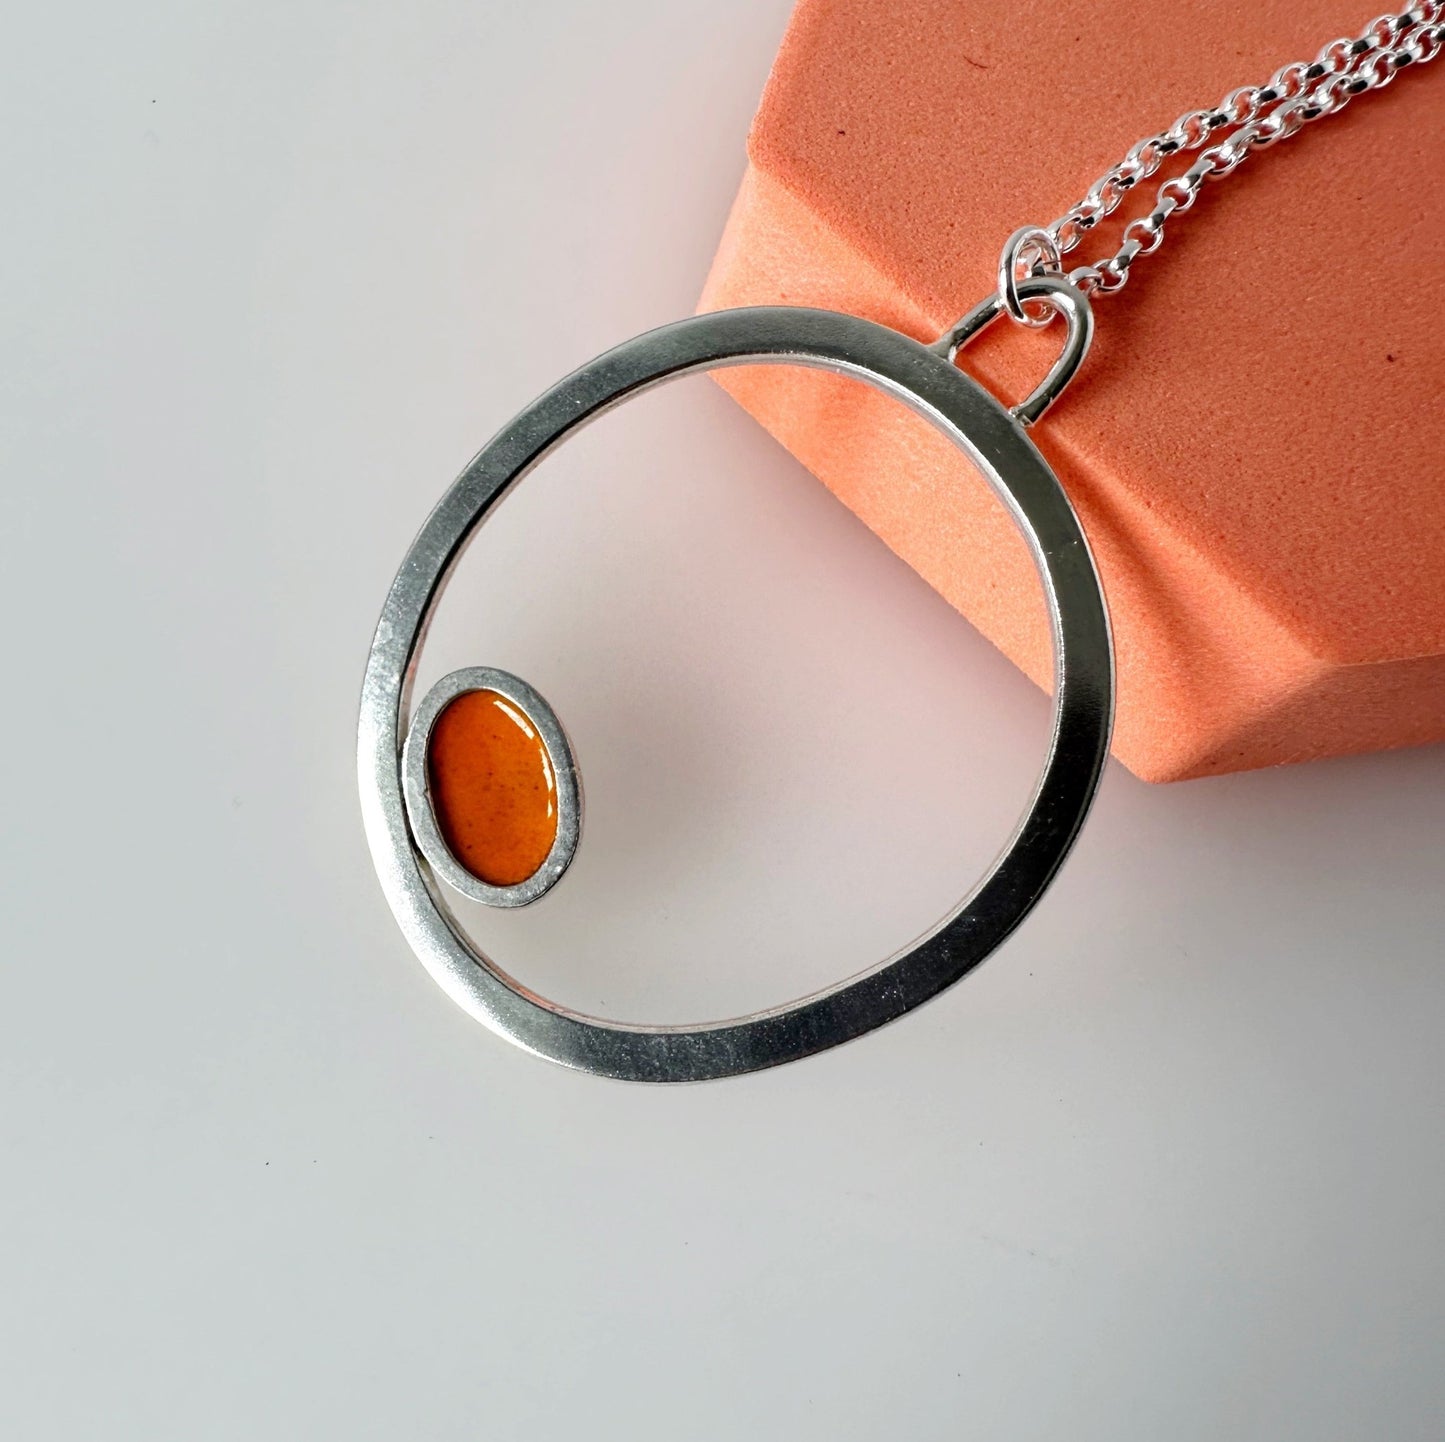 Silver Circle Pendant with Enamelled Oval in Orange - MaisyPlum